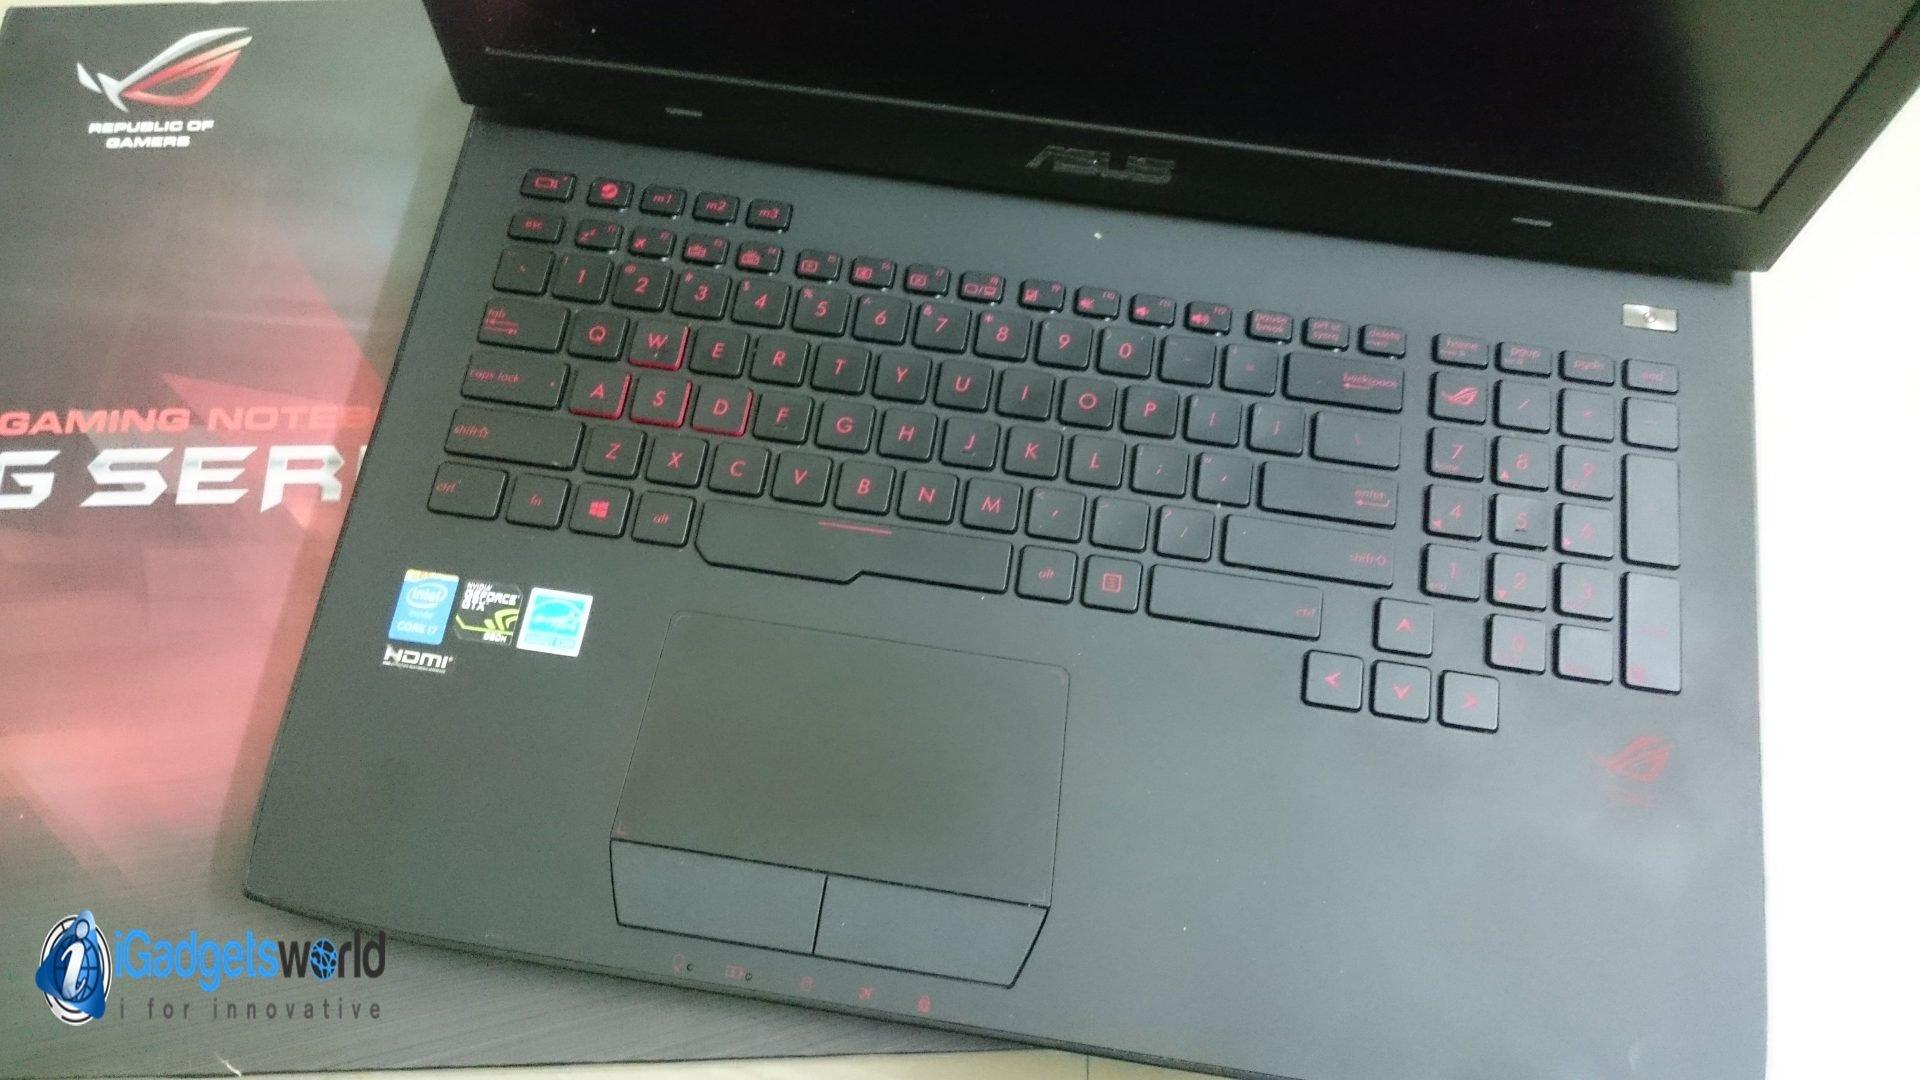 Asus ROG G751J Review: A Slightly Overpriced Ultra High-End Gaming Laptop - 24